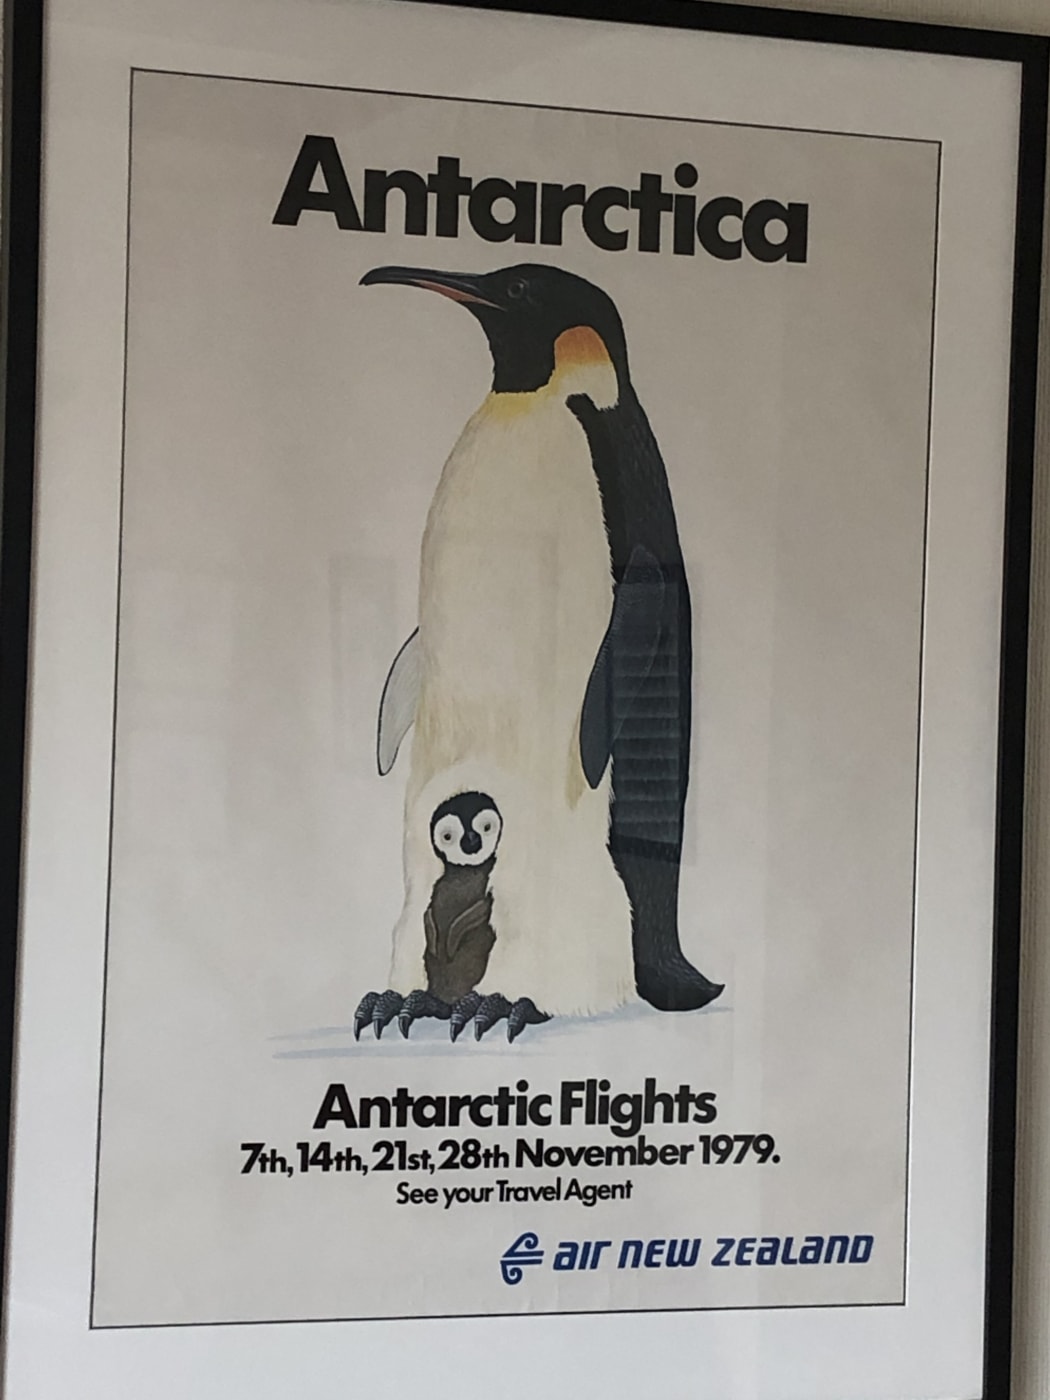 The poster advertising the Antarctic flights and their dates in November 1979